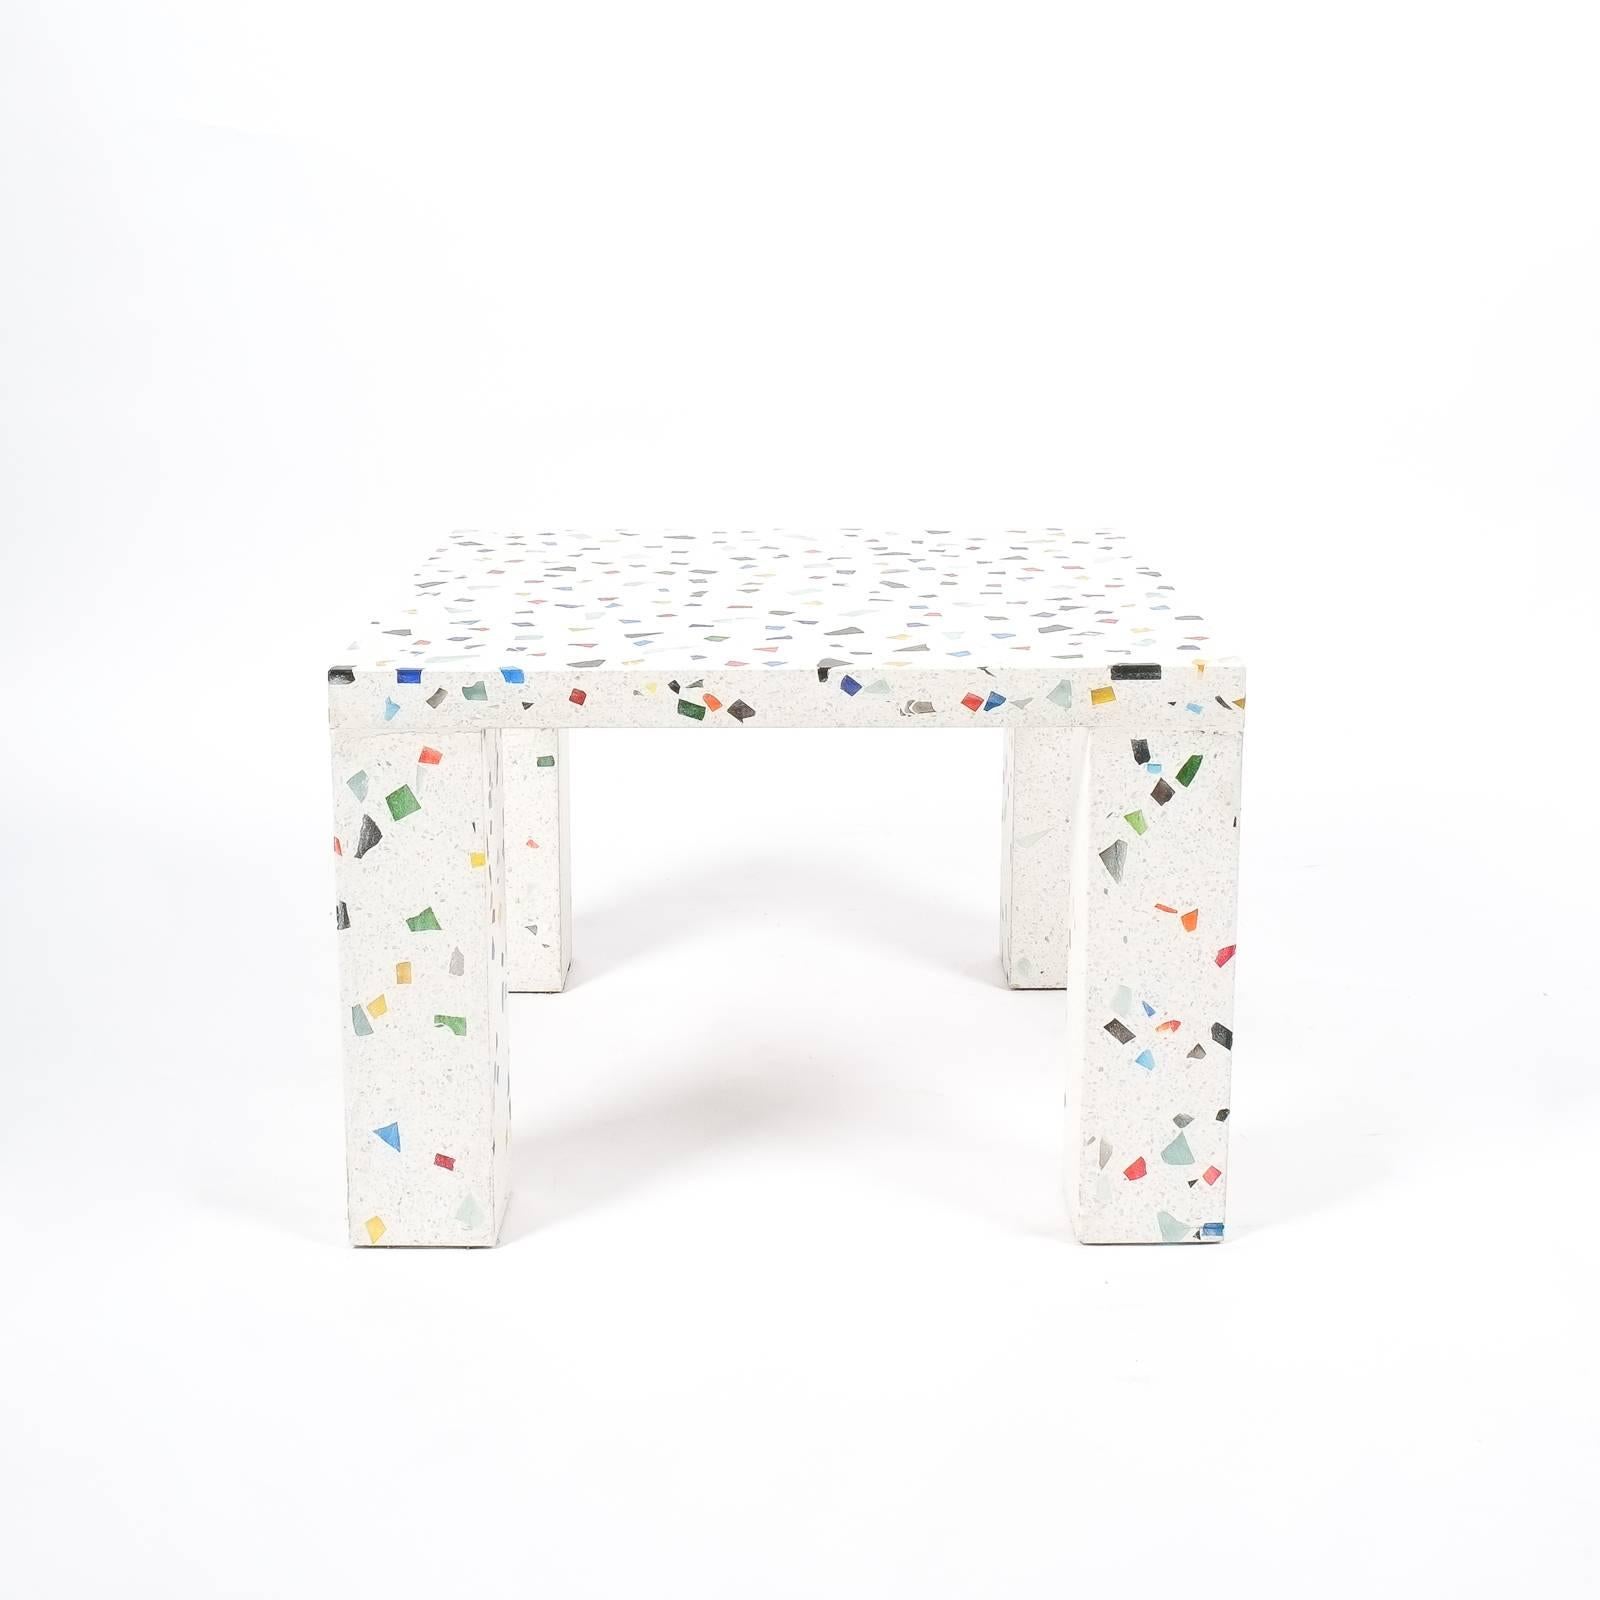 Postmodern iconic terrazzo table by Shiro Kuramata for Memphis, 1983. Very heavy solid square table made from colored glass infused terrazzo. The condition is good, one glass piece is missing. Dimensions: W 23.63 x D 23.63 x H 15.74.

 